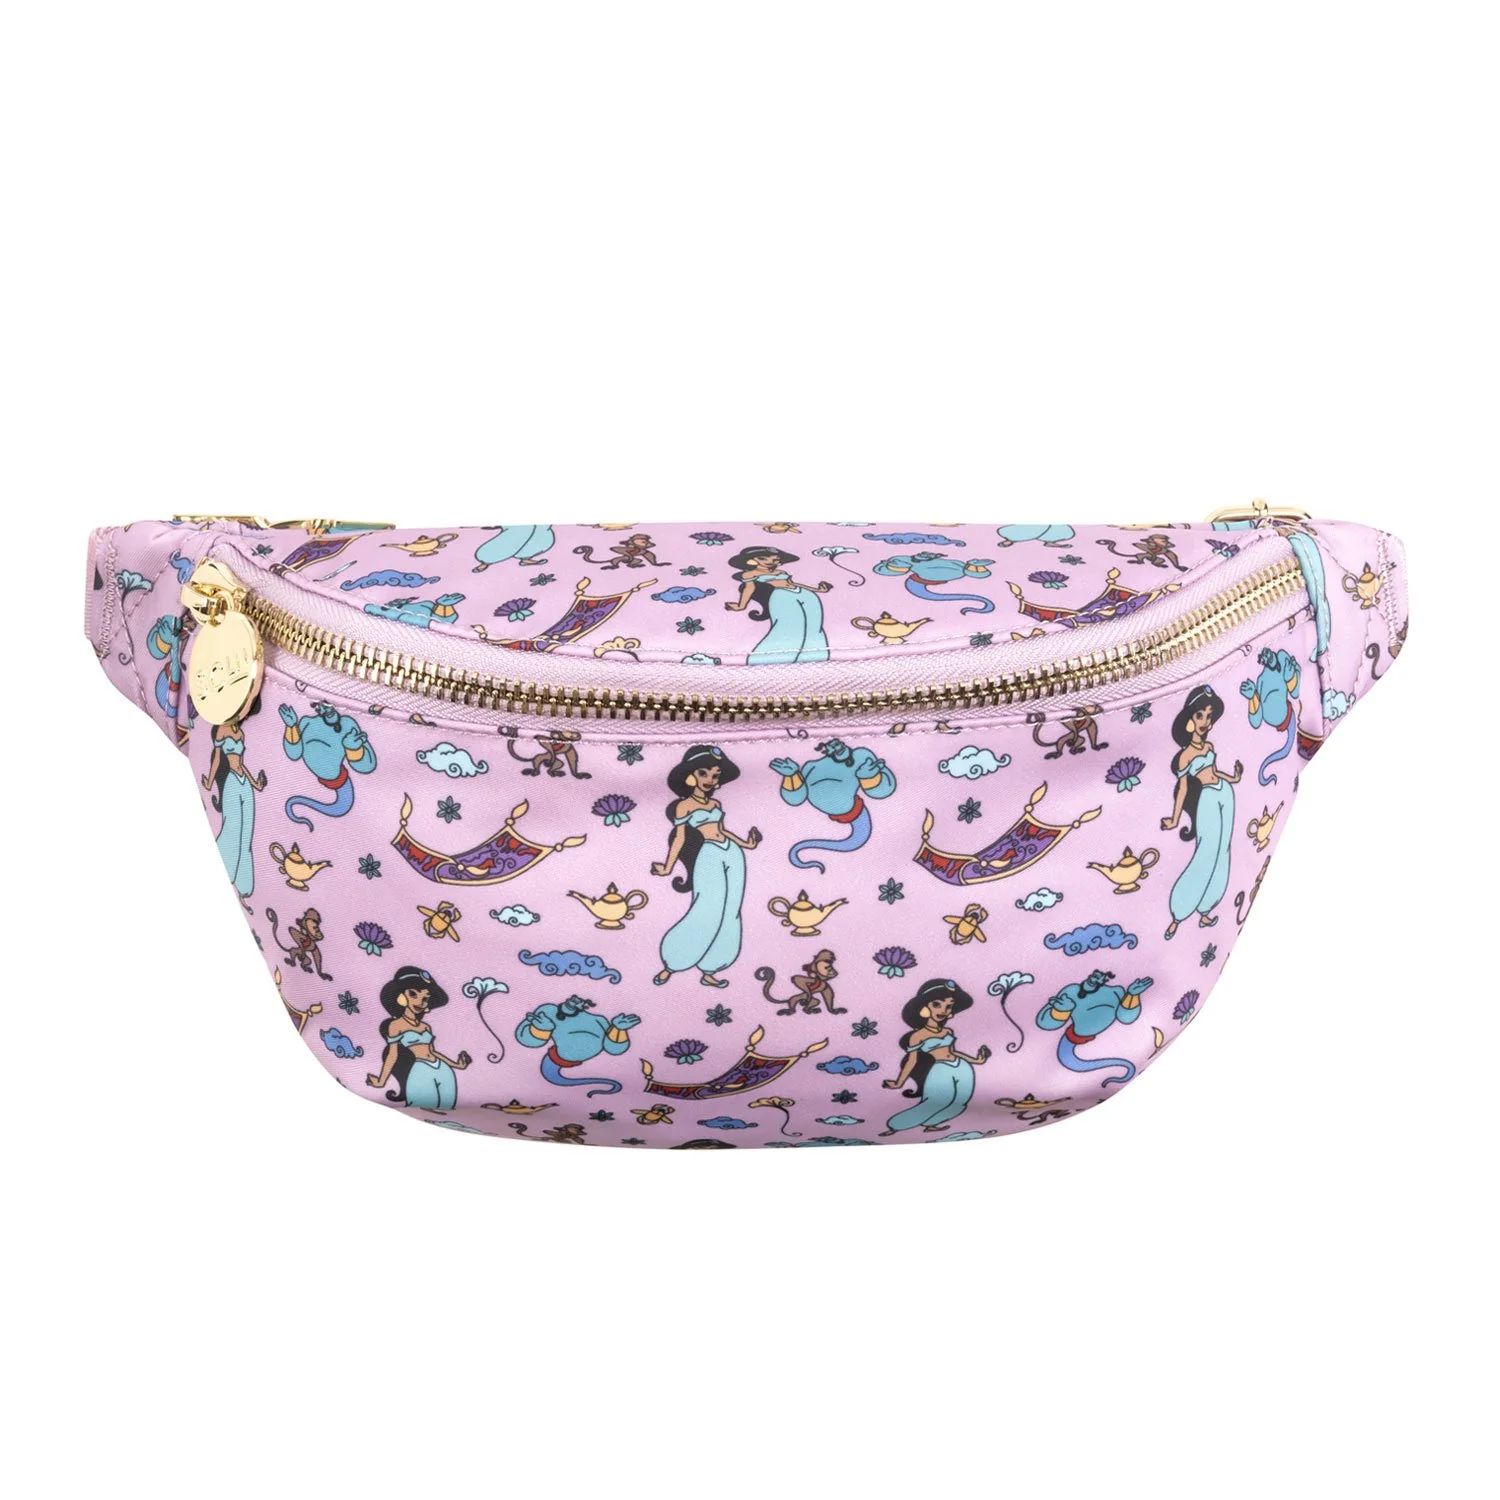 Infinite Wishes Fanny Pack | SCLN Customizable Fanny Pack - Stoney Clover Lane | Stoney Clover Lane